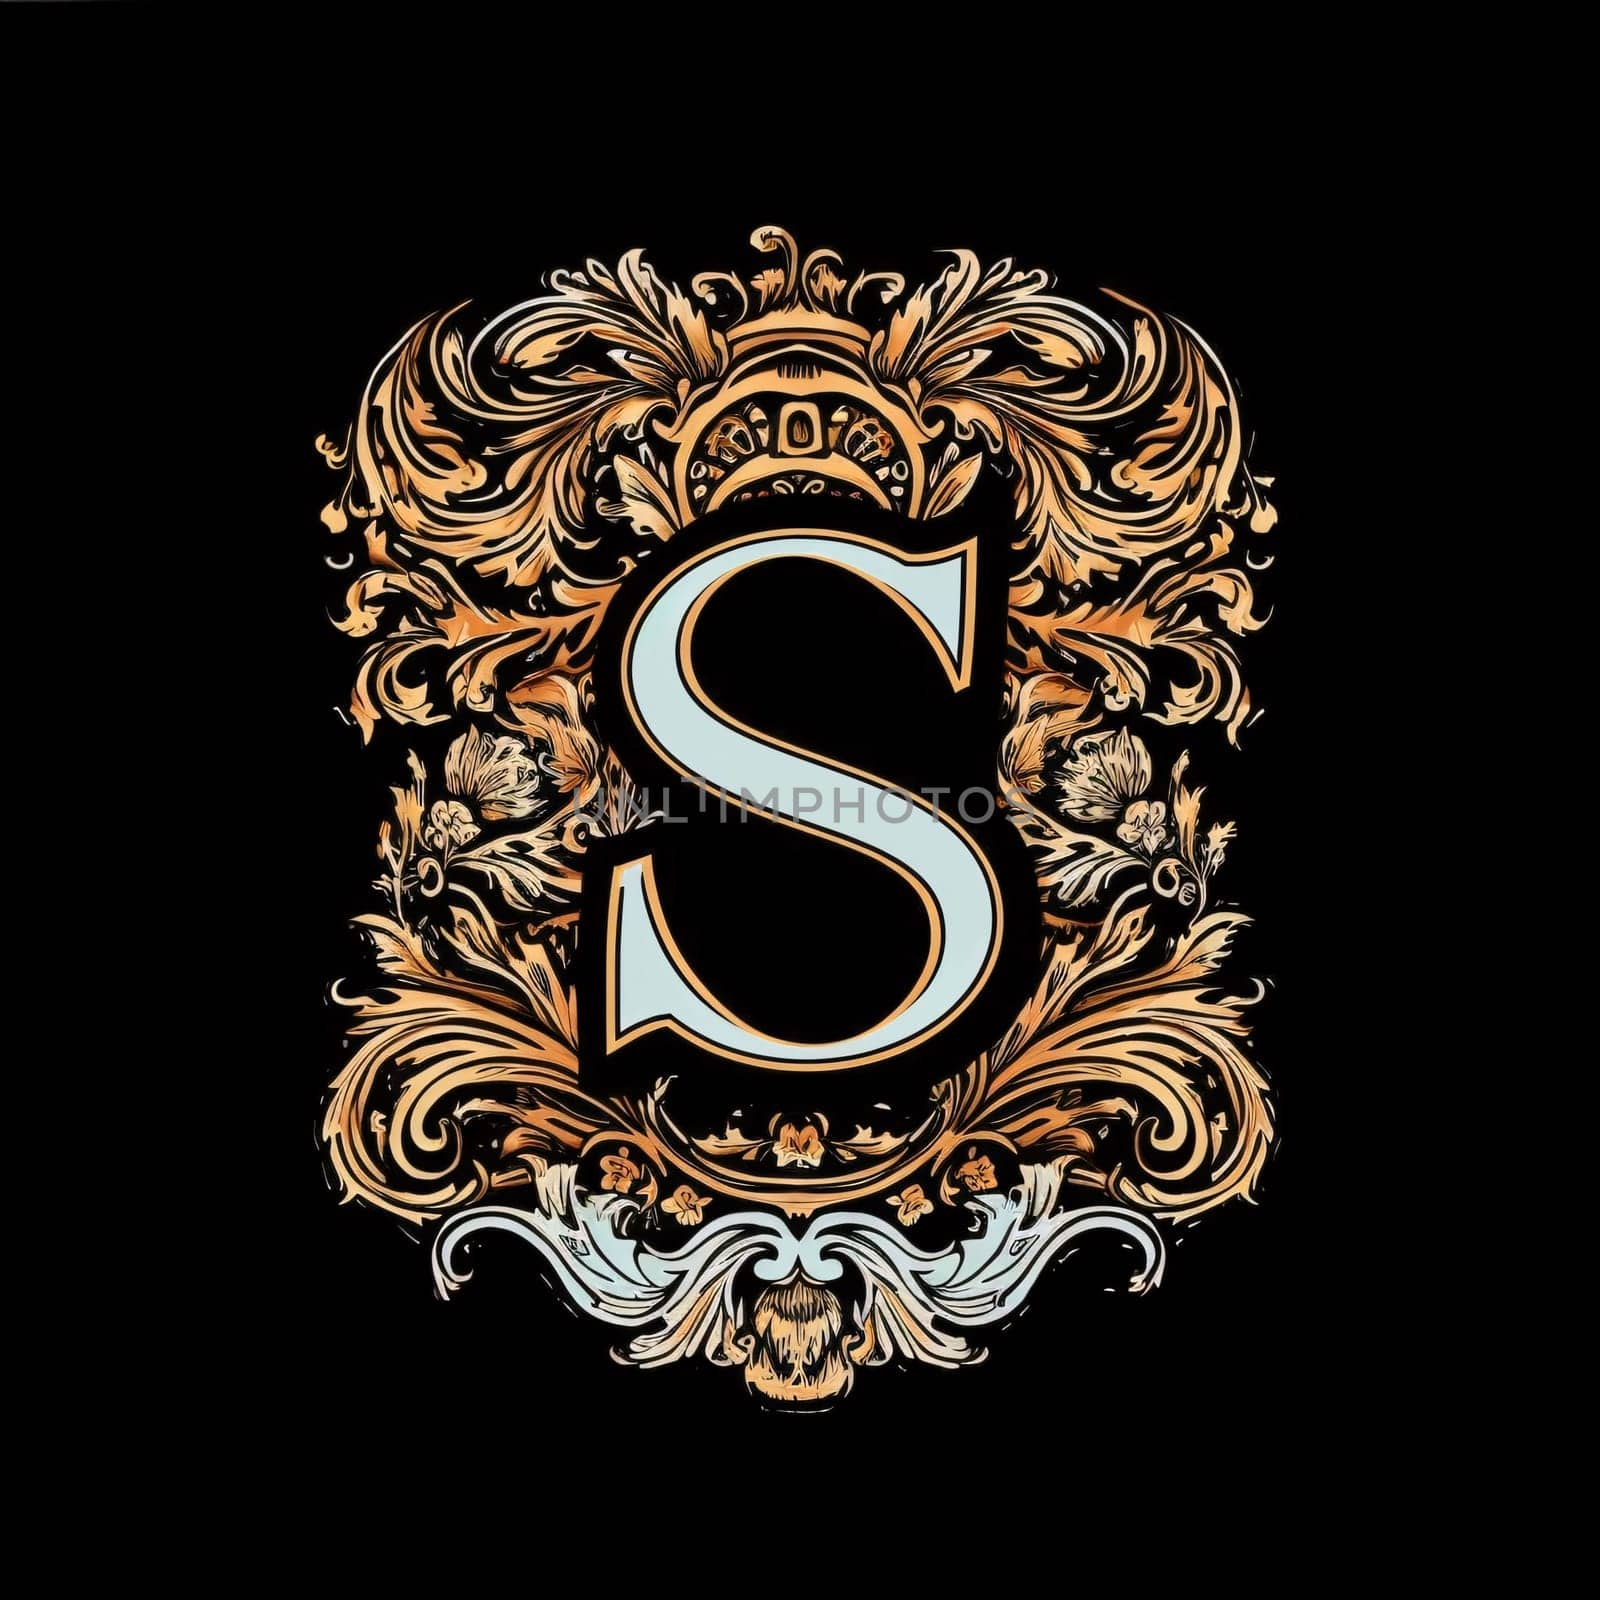 Graphic alphabet letters: Luxury vintage capital letter S. The letter is surrounded by ornate elements.